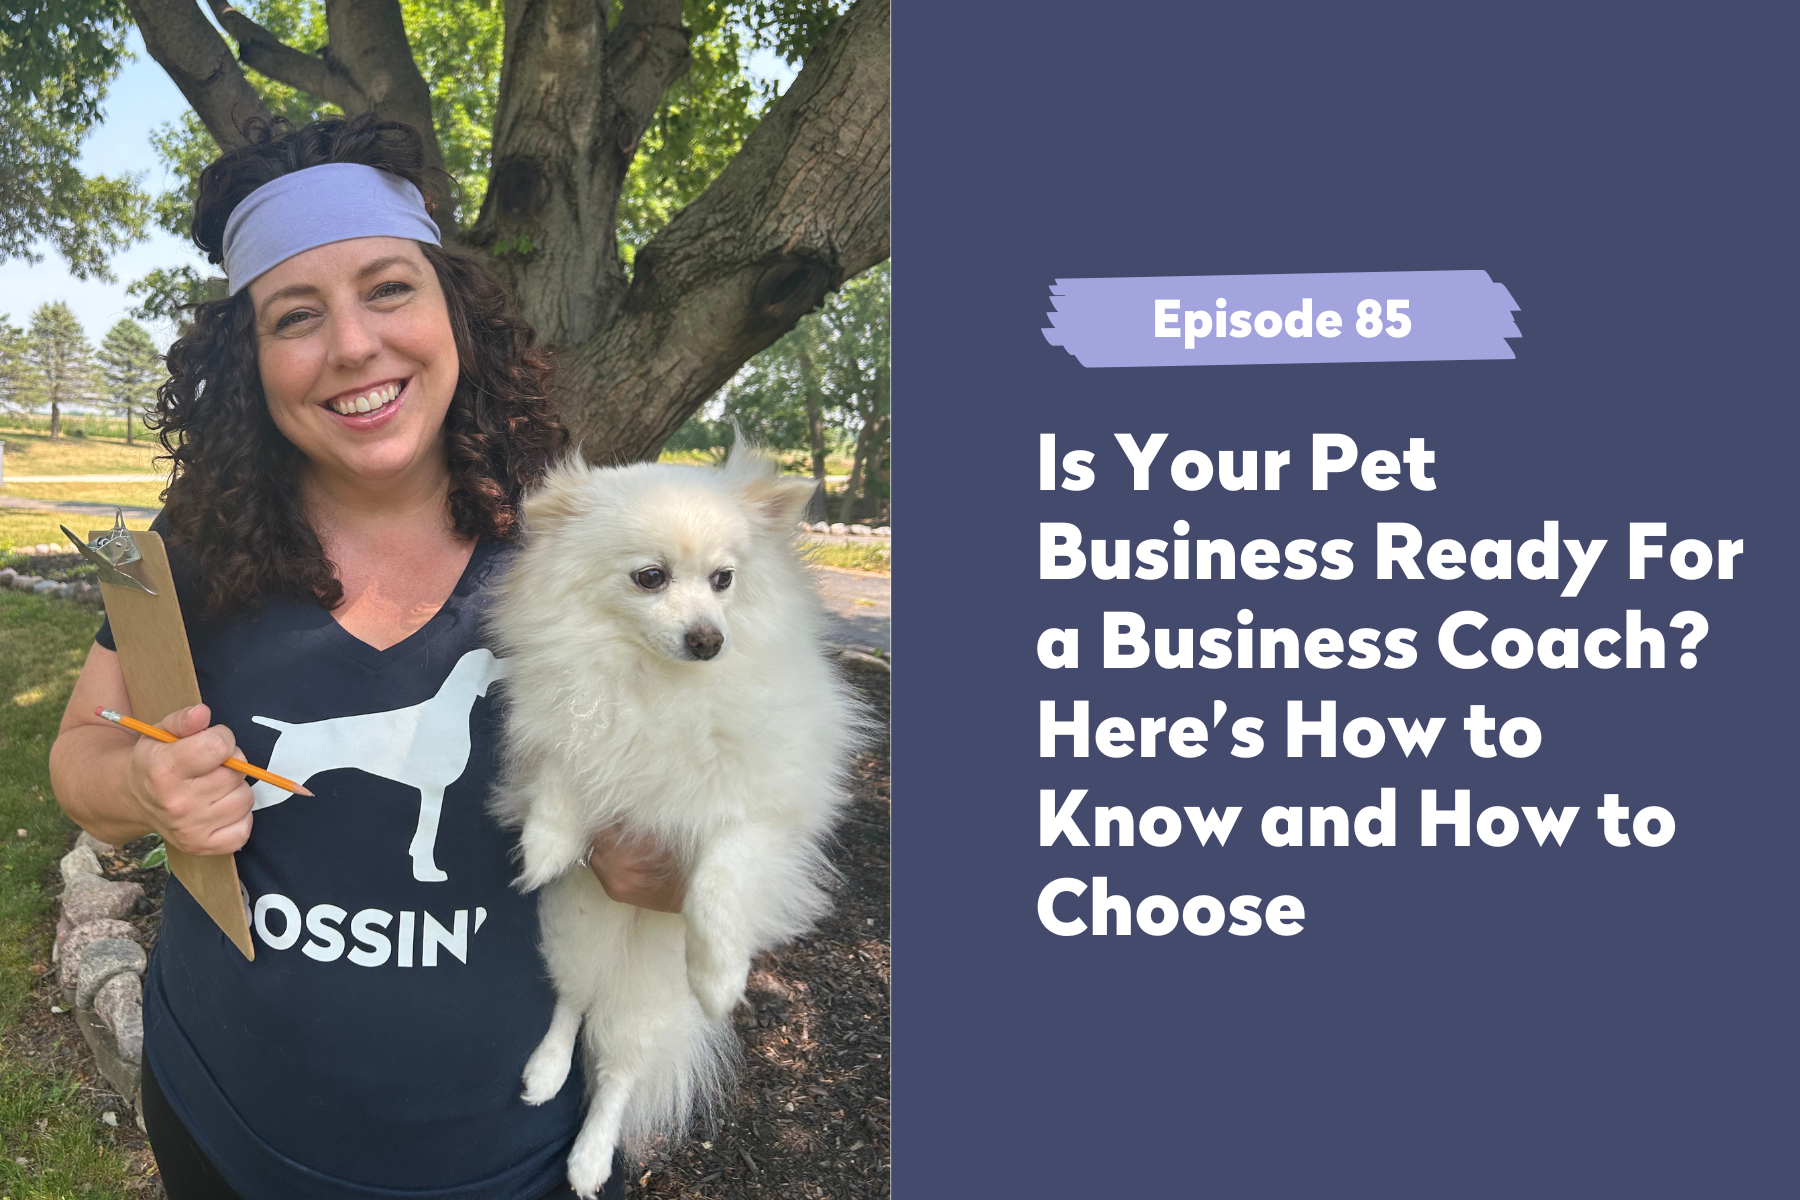 Episode 85 | Is Your Pet Business Ready For a Business Coach? Here’s How to Know and How to Choose